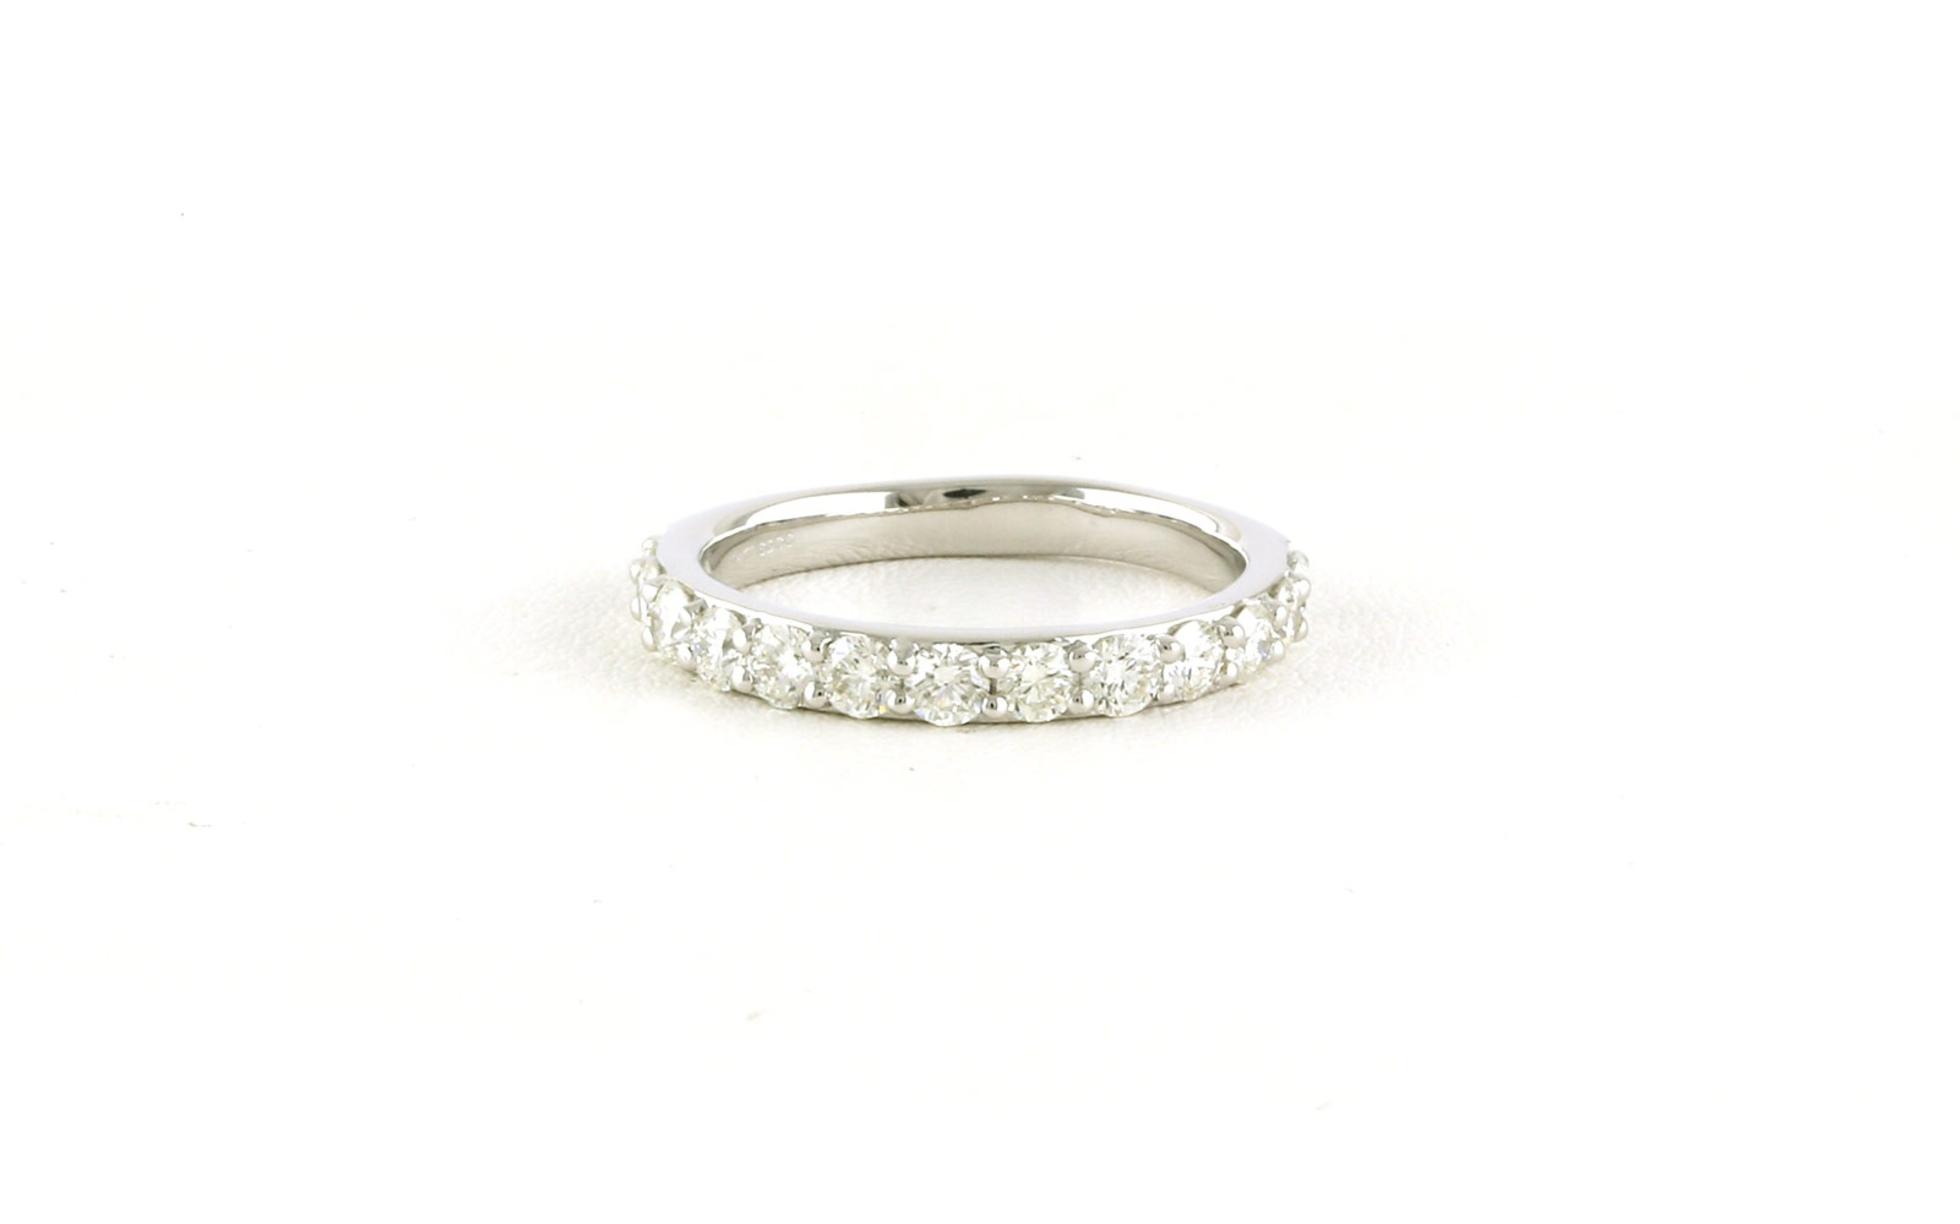 13-Stone Share-prong Diamond Wedding Band in White Gold (1.00cts TWT)